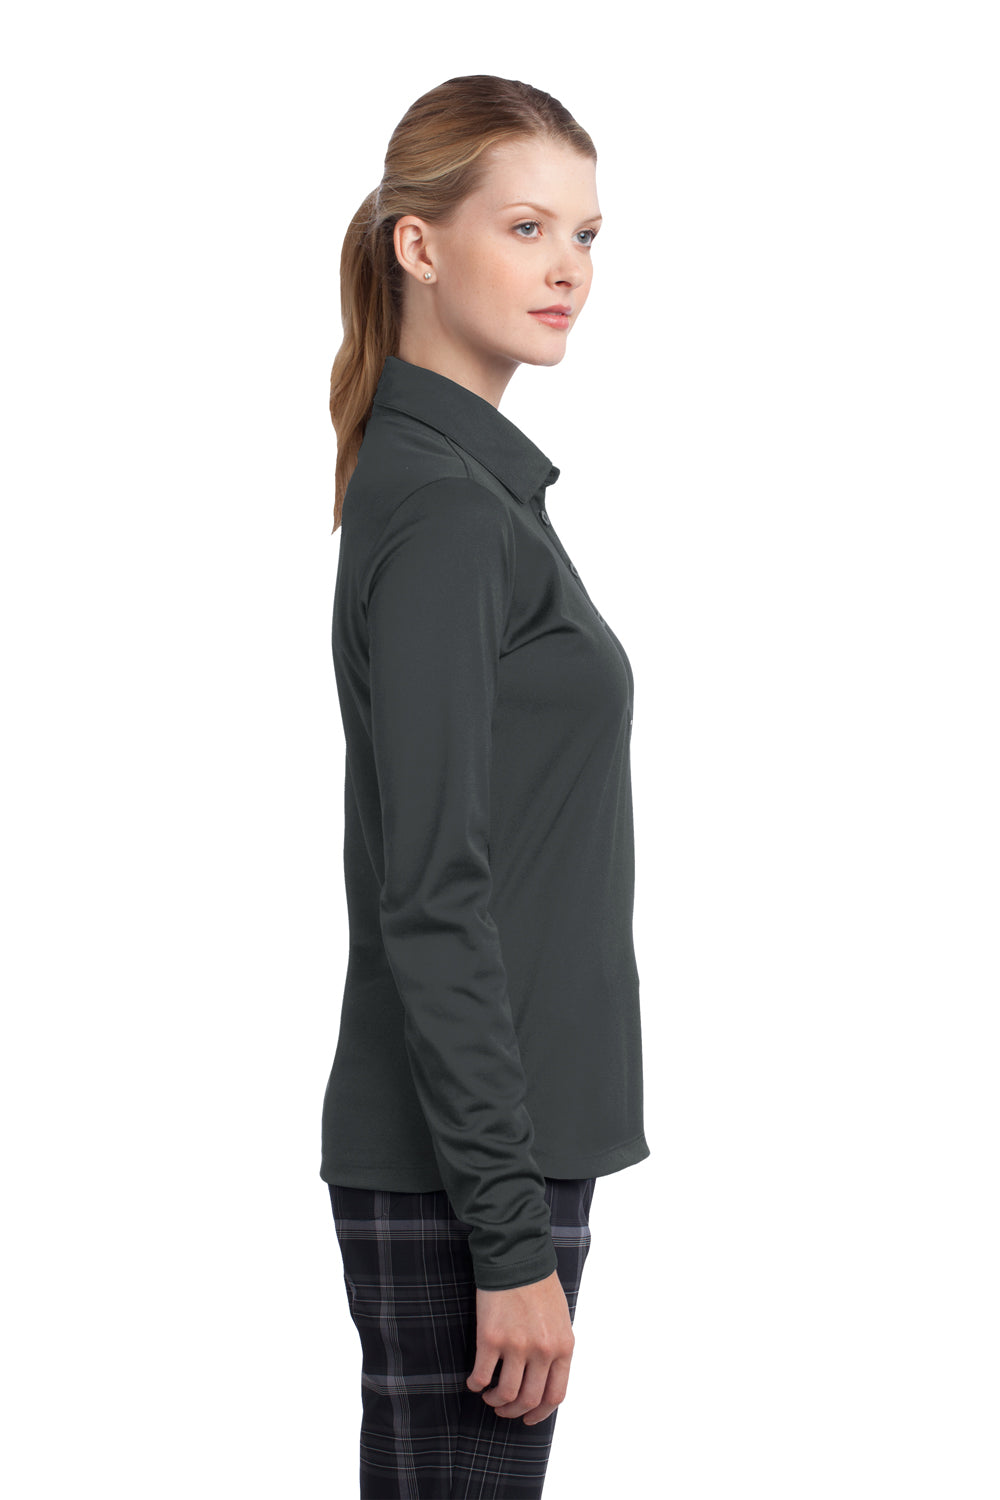 Nike 545322 Womens Stretch Tech Dri-Fit Moisture Wicking Long Sleeve Polo Shirt Anthracite Grey Model Side